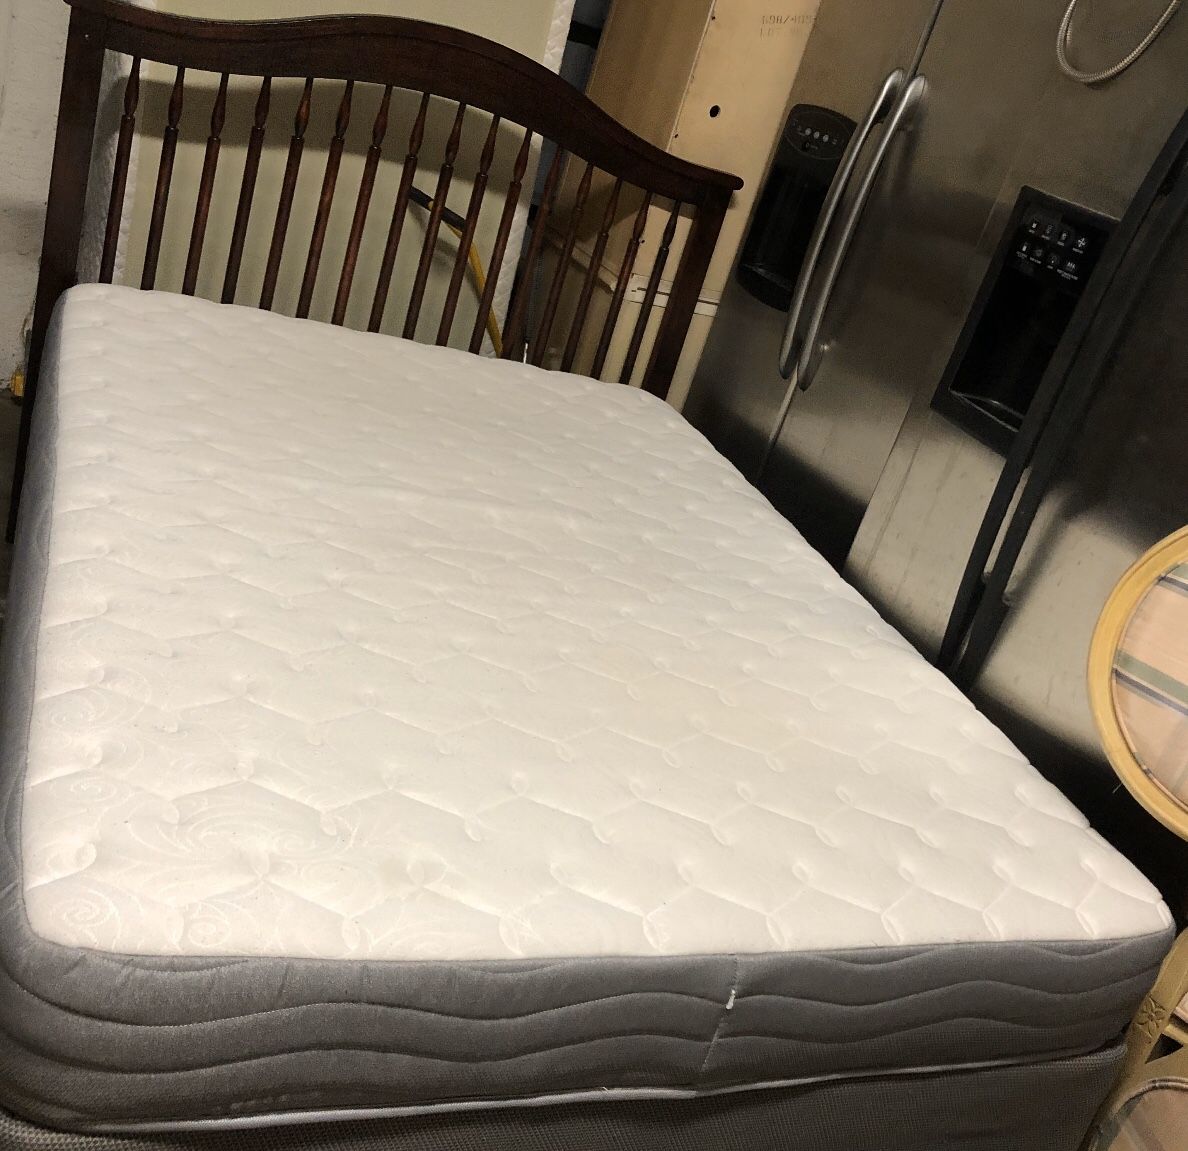 BEAUTIFUL FULL BED INCLUDE HEADBOARD FRAME MATTRESS MEMORY FOAM BOX SPRING ALL EXCELLENT CONDITION